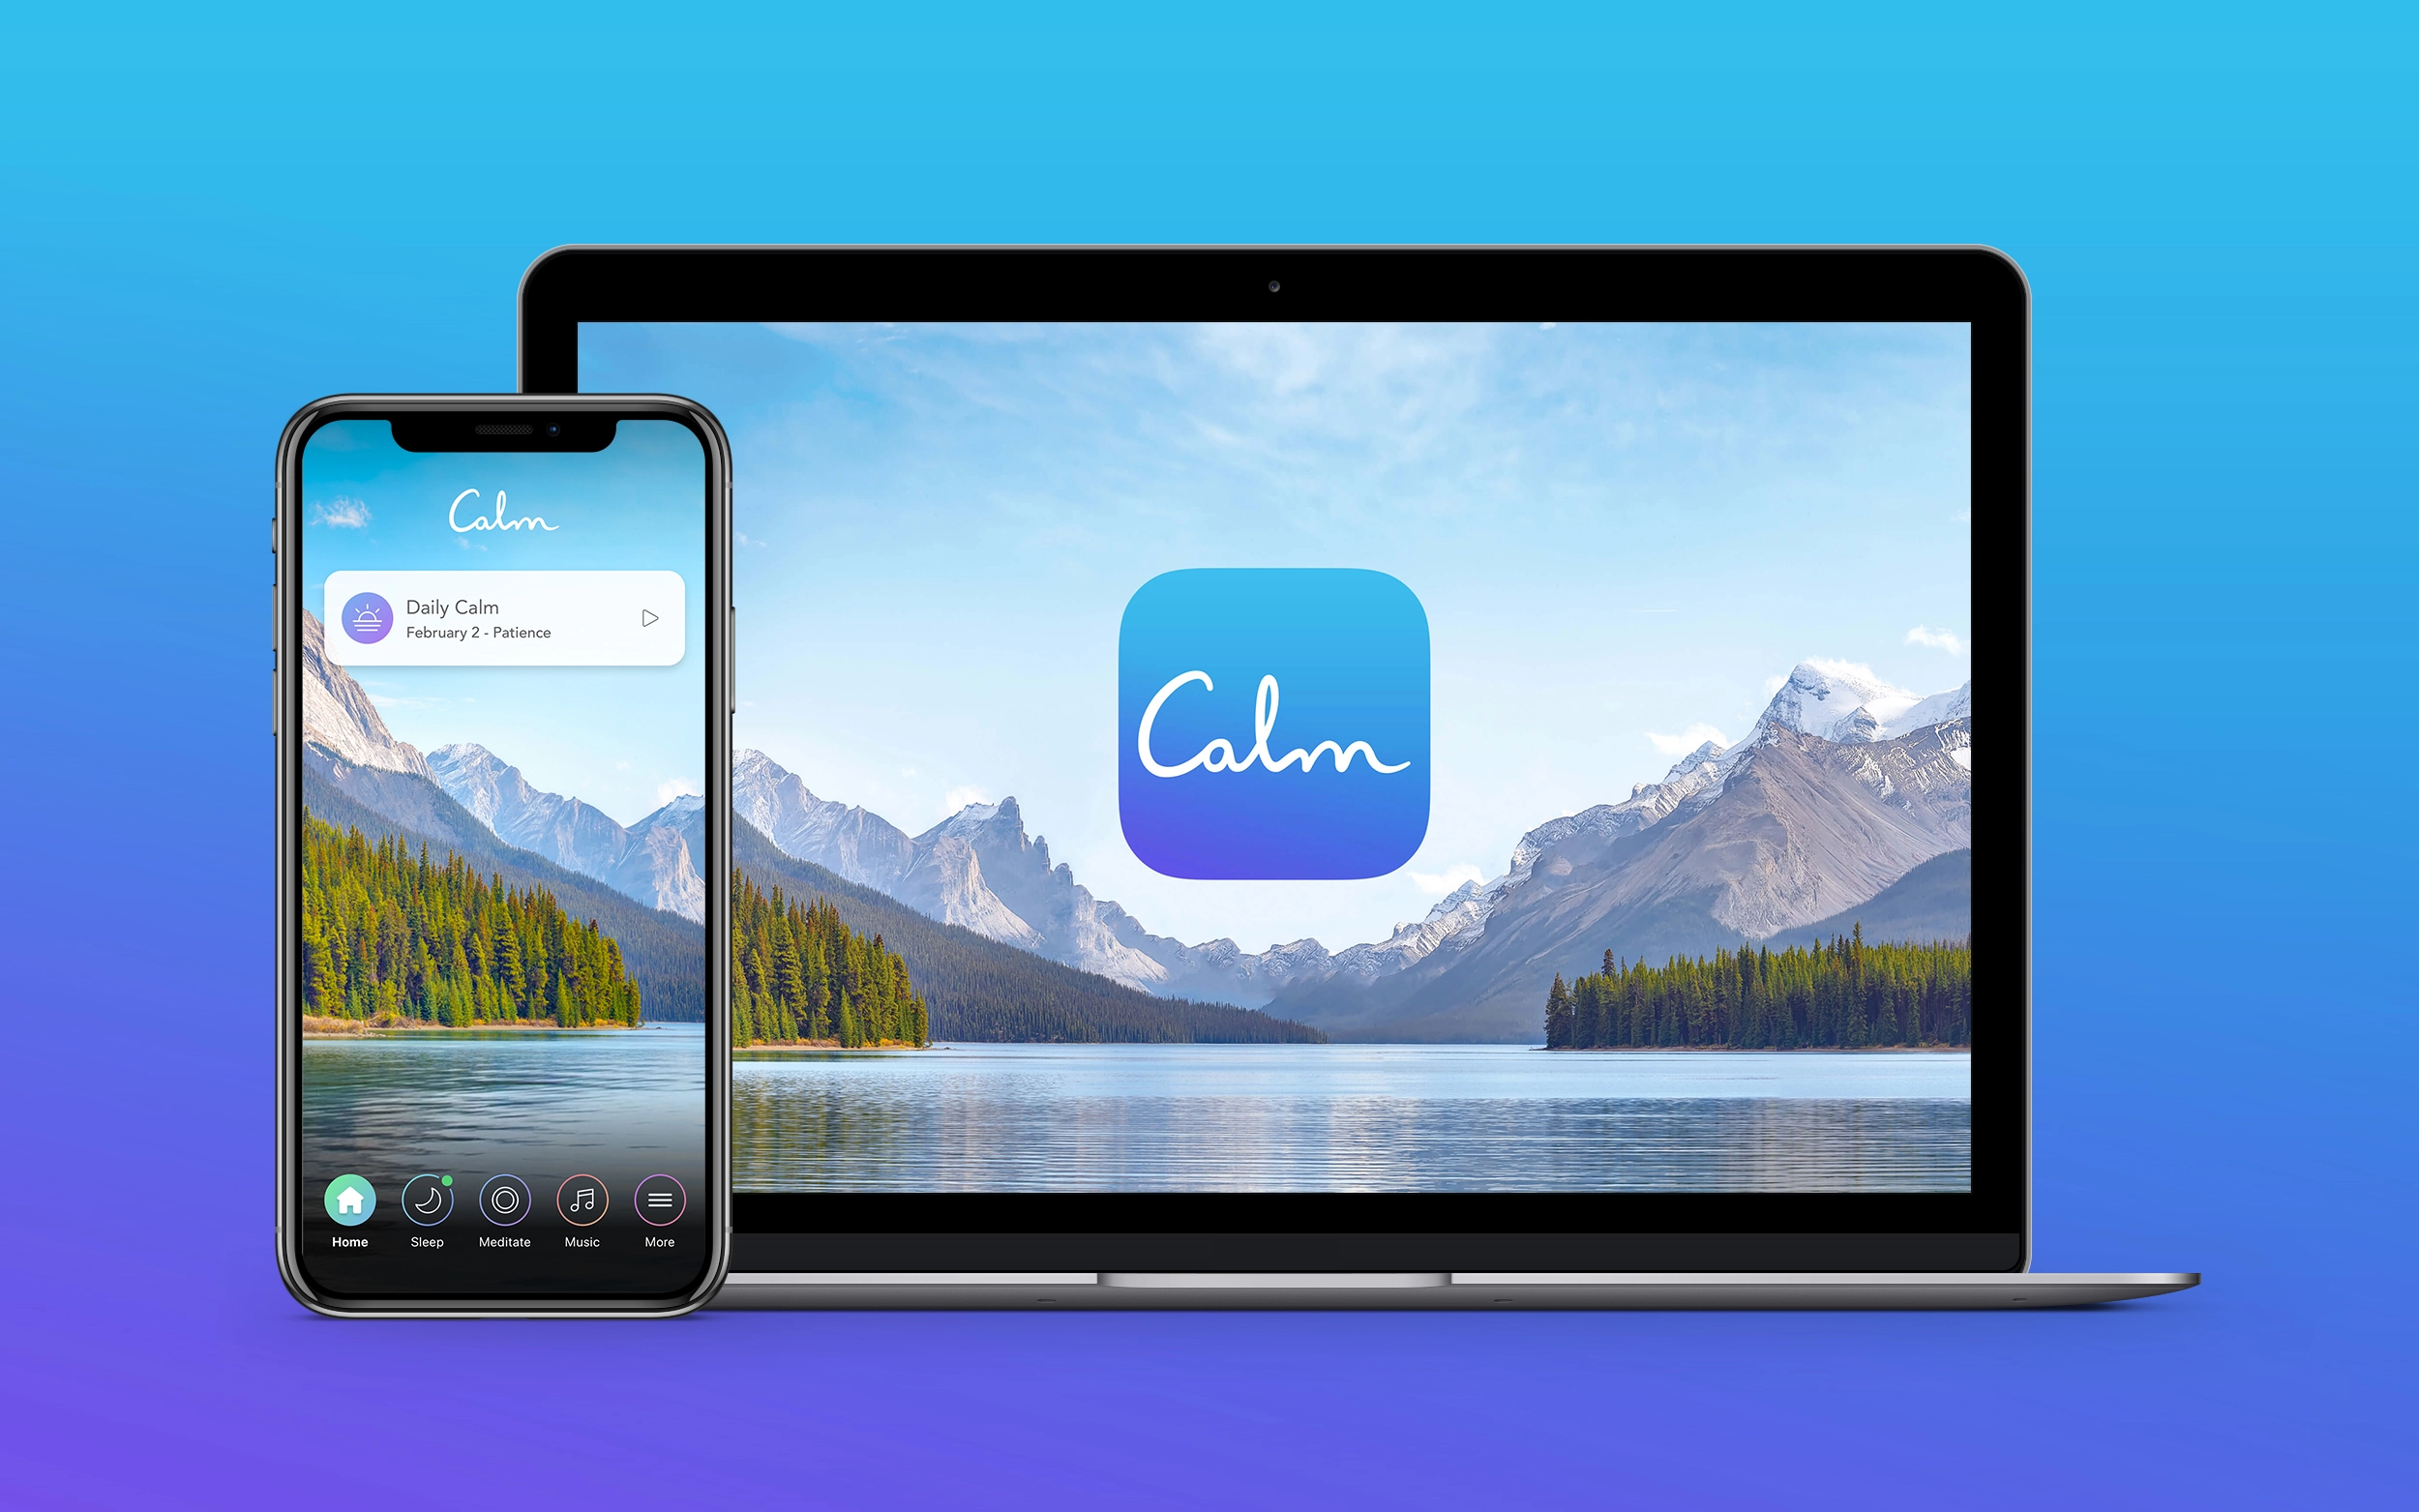 Calm Premium - 3 Months Trial Subscription Key (ONLY FOR NEW ACCOUNTS) [$ 0.8]